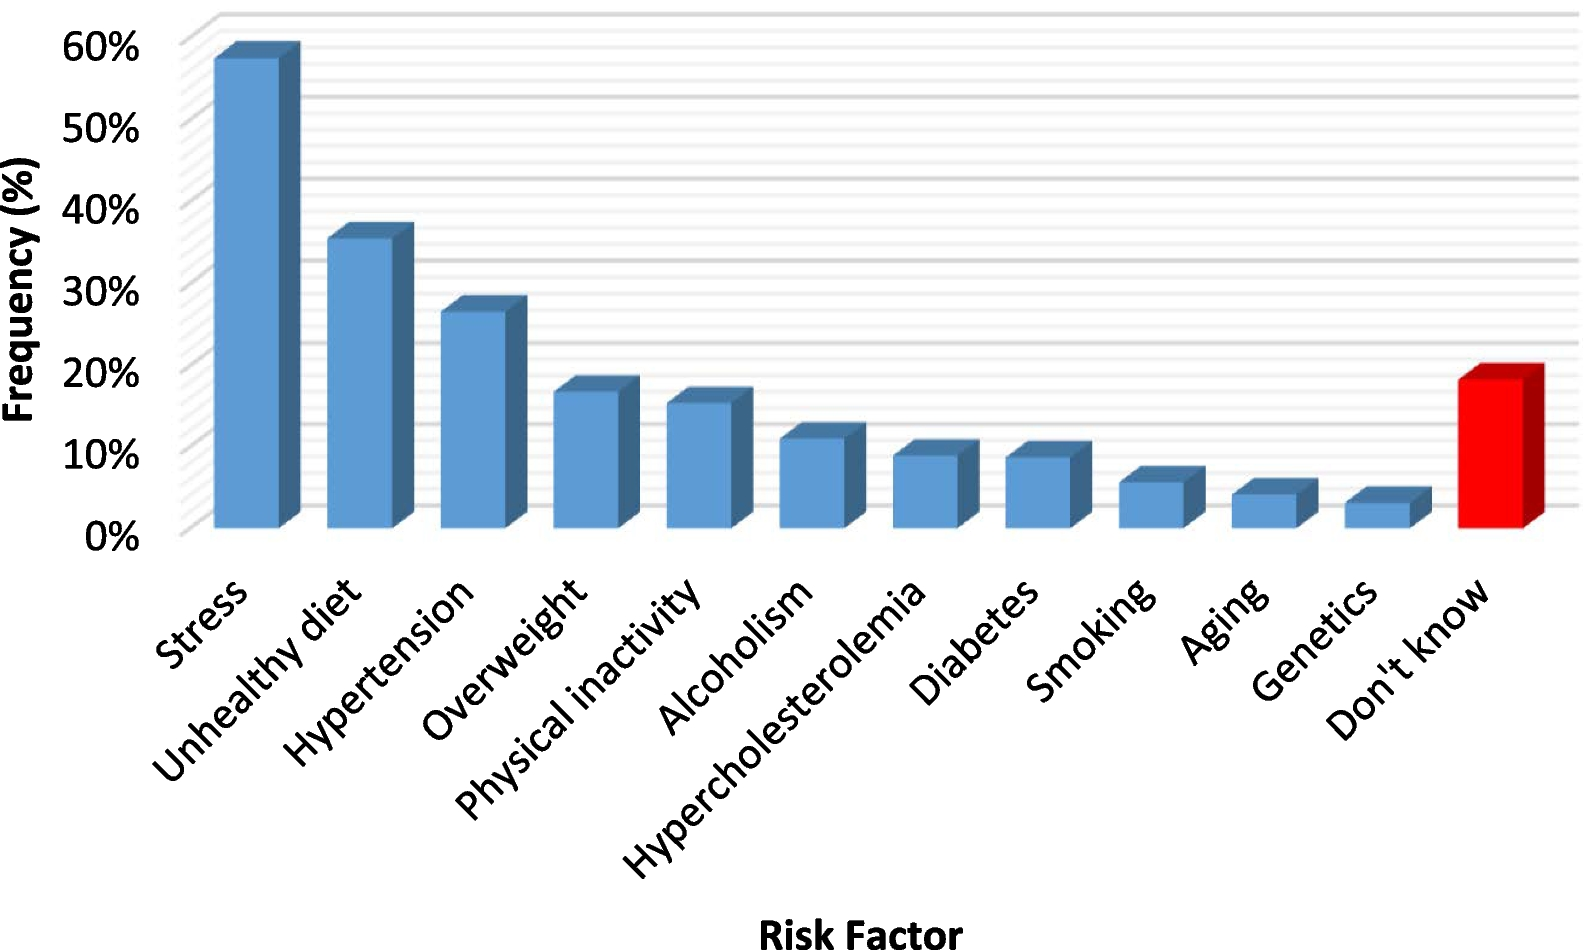 Public knowledge of risk factors and warning signs of heart attack and stroke